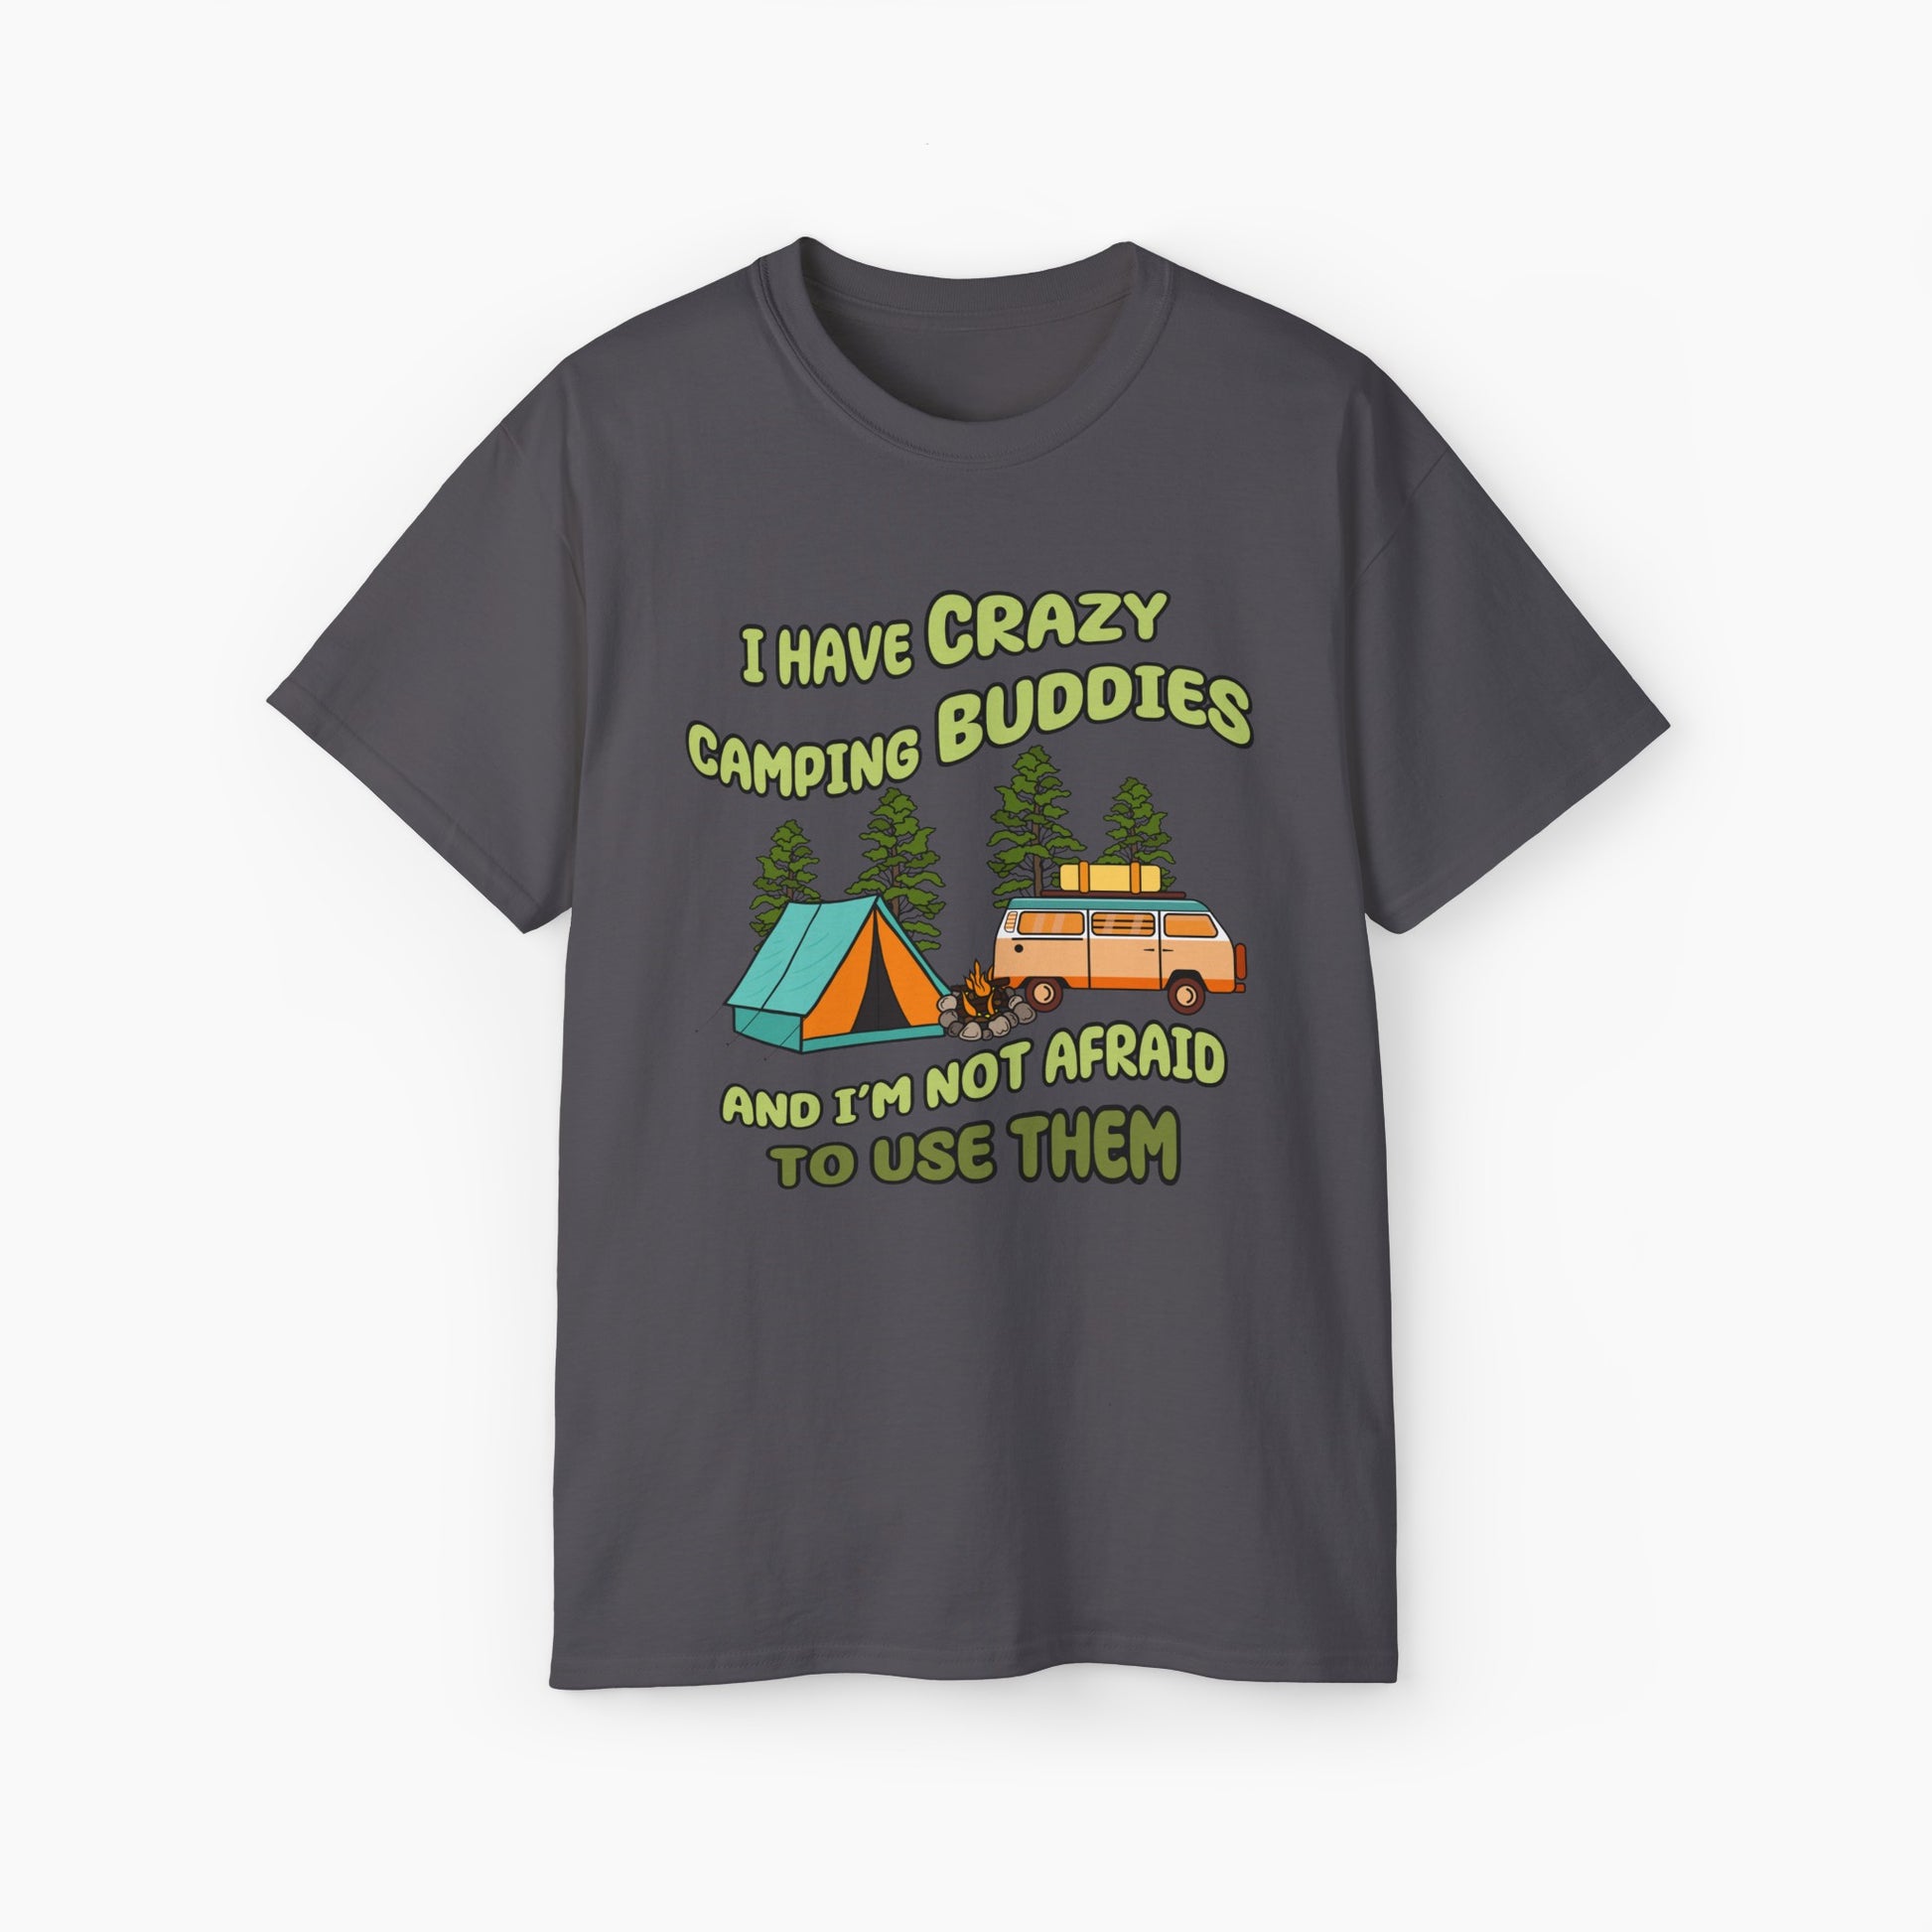 Dark grey t-shirt with the text 'I have crazy camping buddies and I am not afraid to use them,' featuring a camping van, campfire, trees, and a tent."